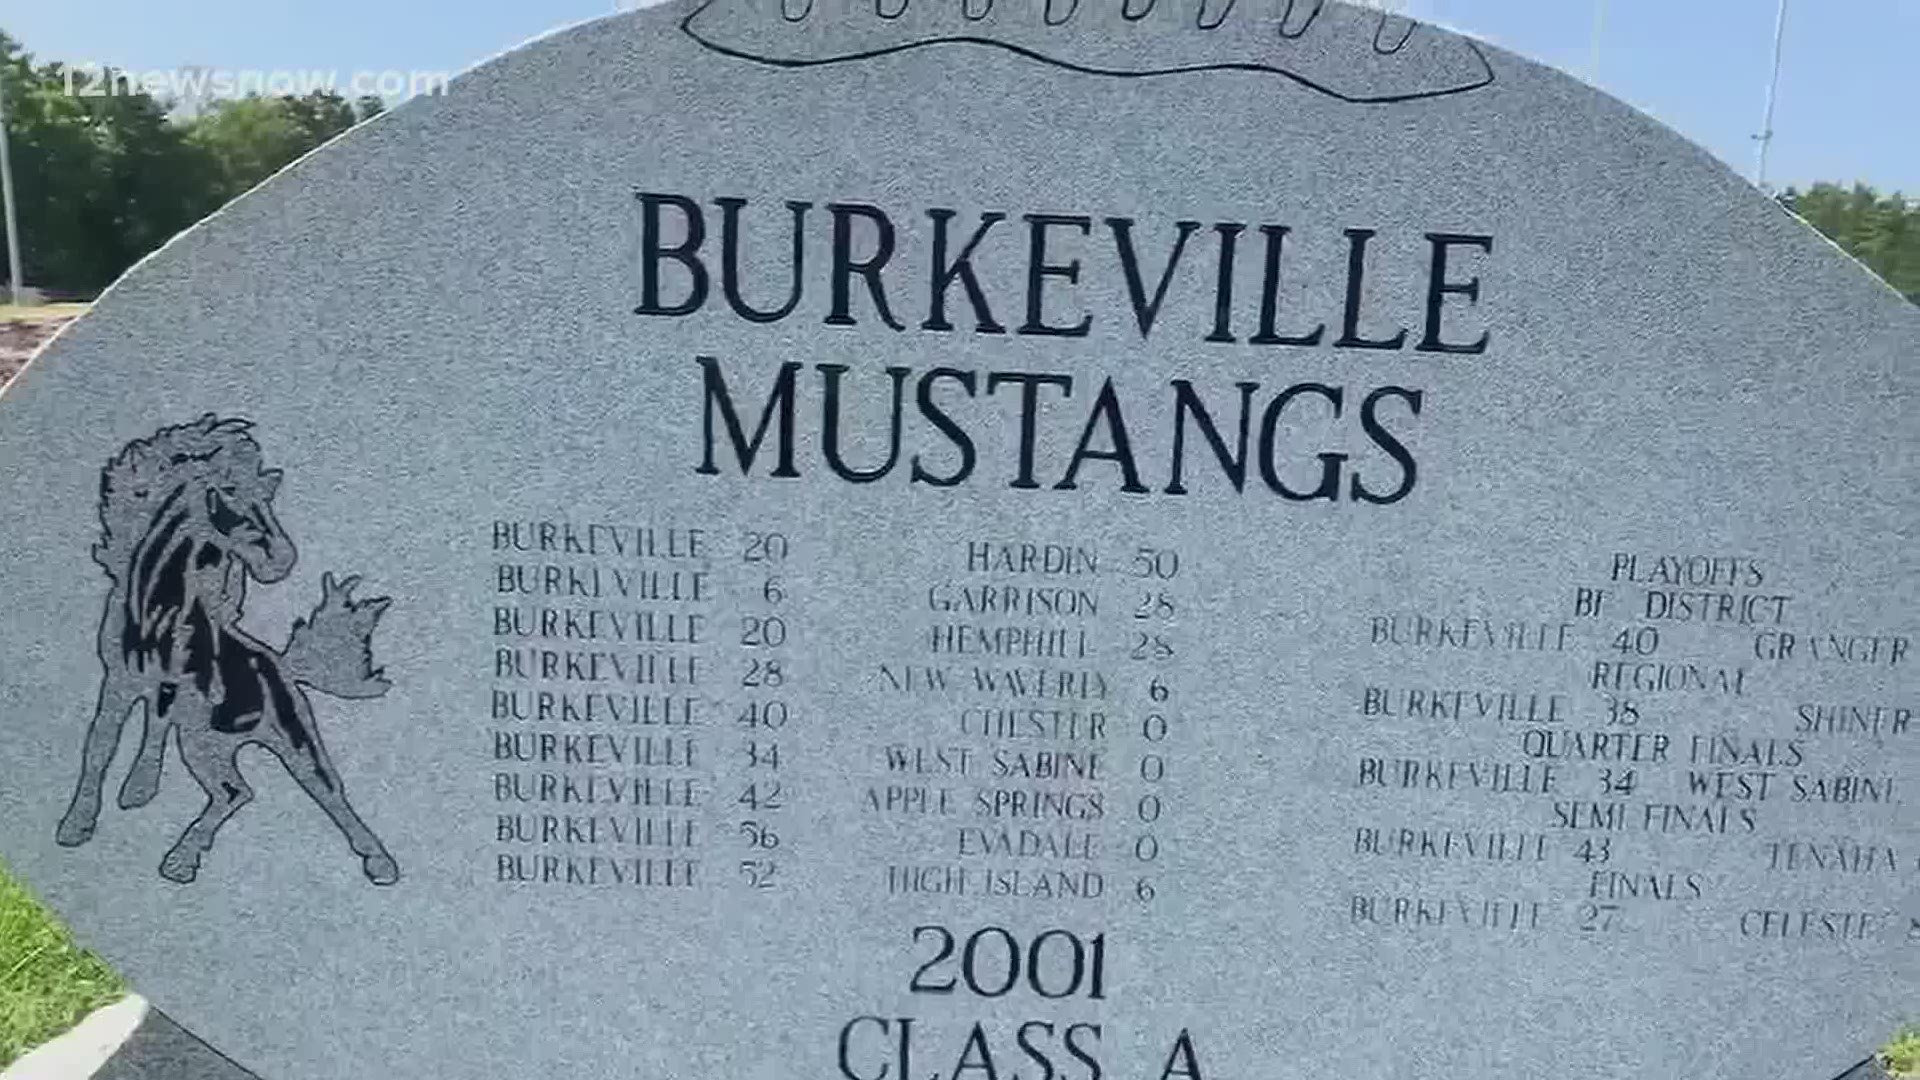 Burkeville is trying to bring back winning tradition